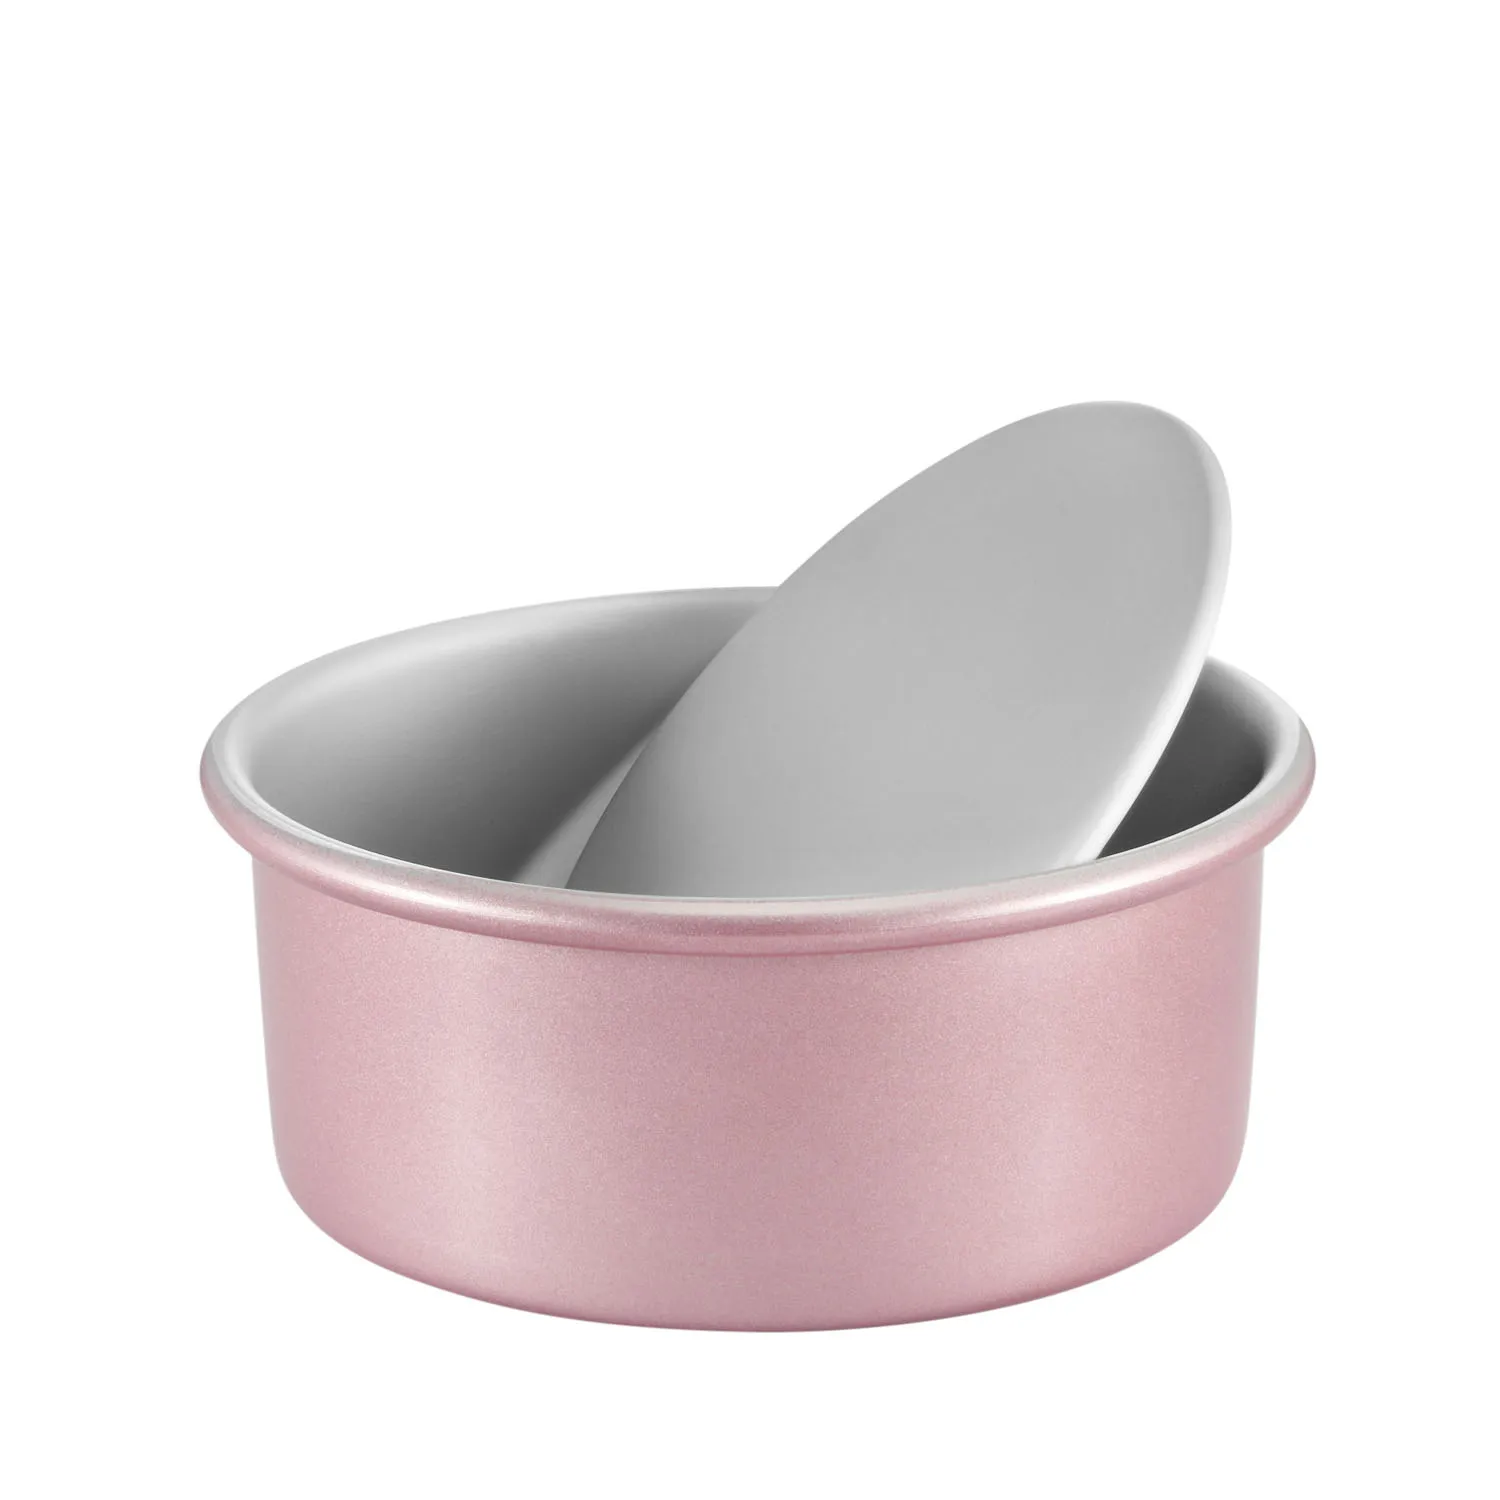 

CHEFMADE 6 Inch Round Shape Aluminium Non Stick Anodized Hight Chiffon Mould Cake Mold Baking Pan With Removable Loose Bottom, Rose gold